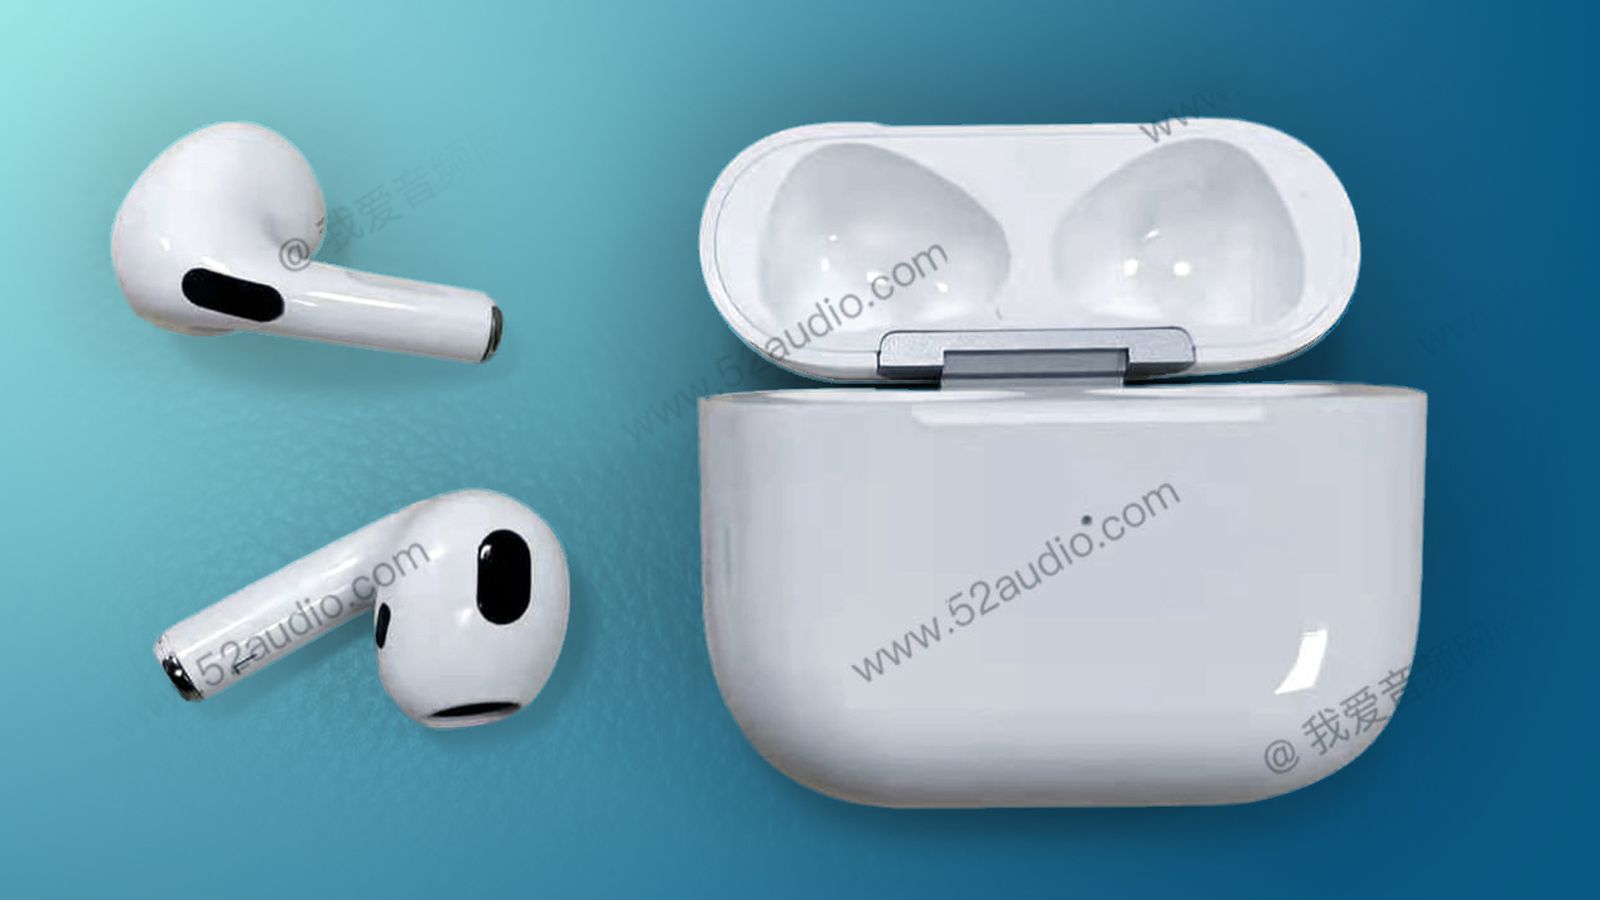 Upcoming AirPods 3 redesign shown in new images